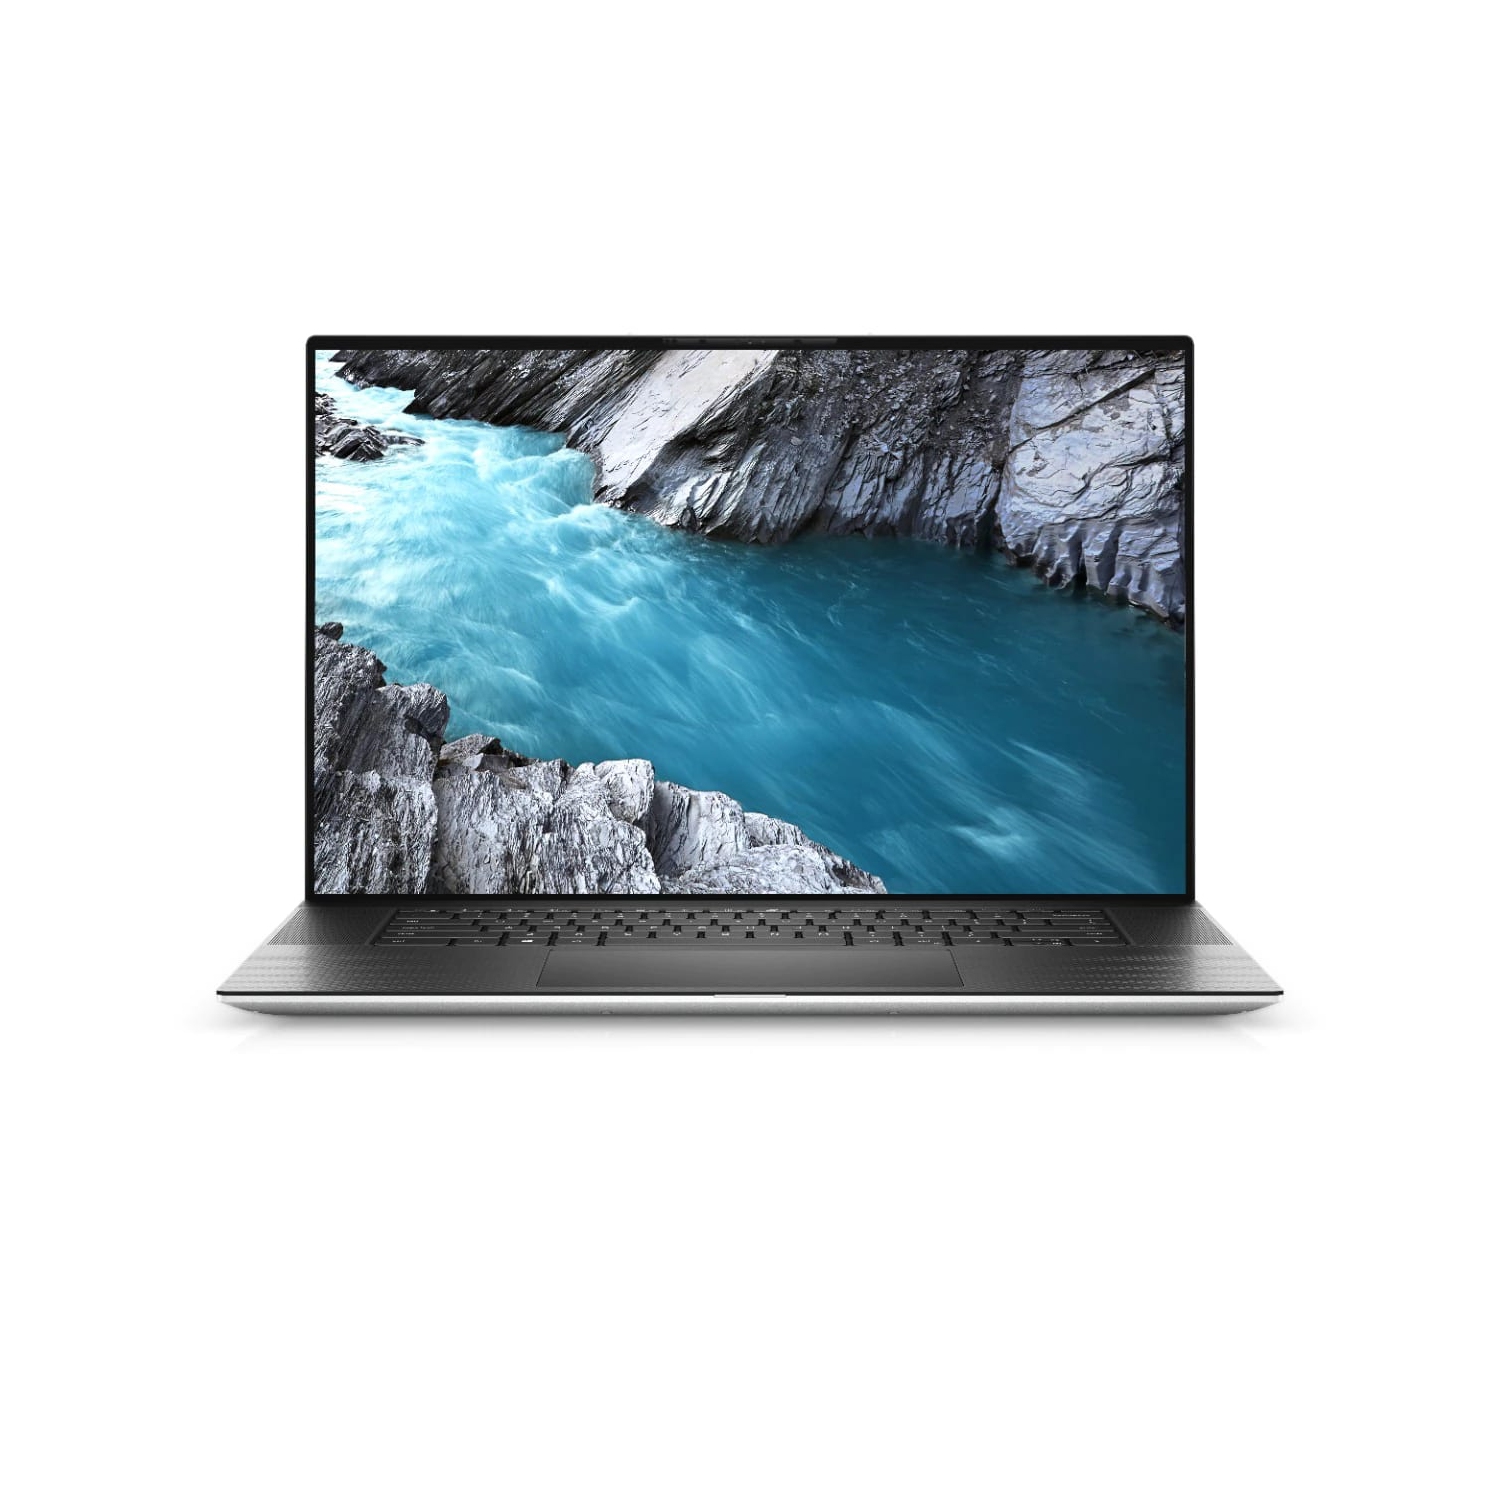 Refurbished (Excellent) - Dell XPS 17 9700 Laptop (2020) | 17" FHD+ | Core i9 - 512GB SSD - 32GB RAM - RTX 2060 | 8 Cores @ 5.3 GHz - 10th Gen CPU Certified Refurbished